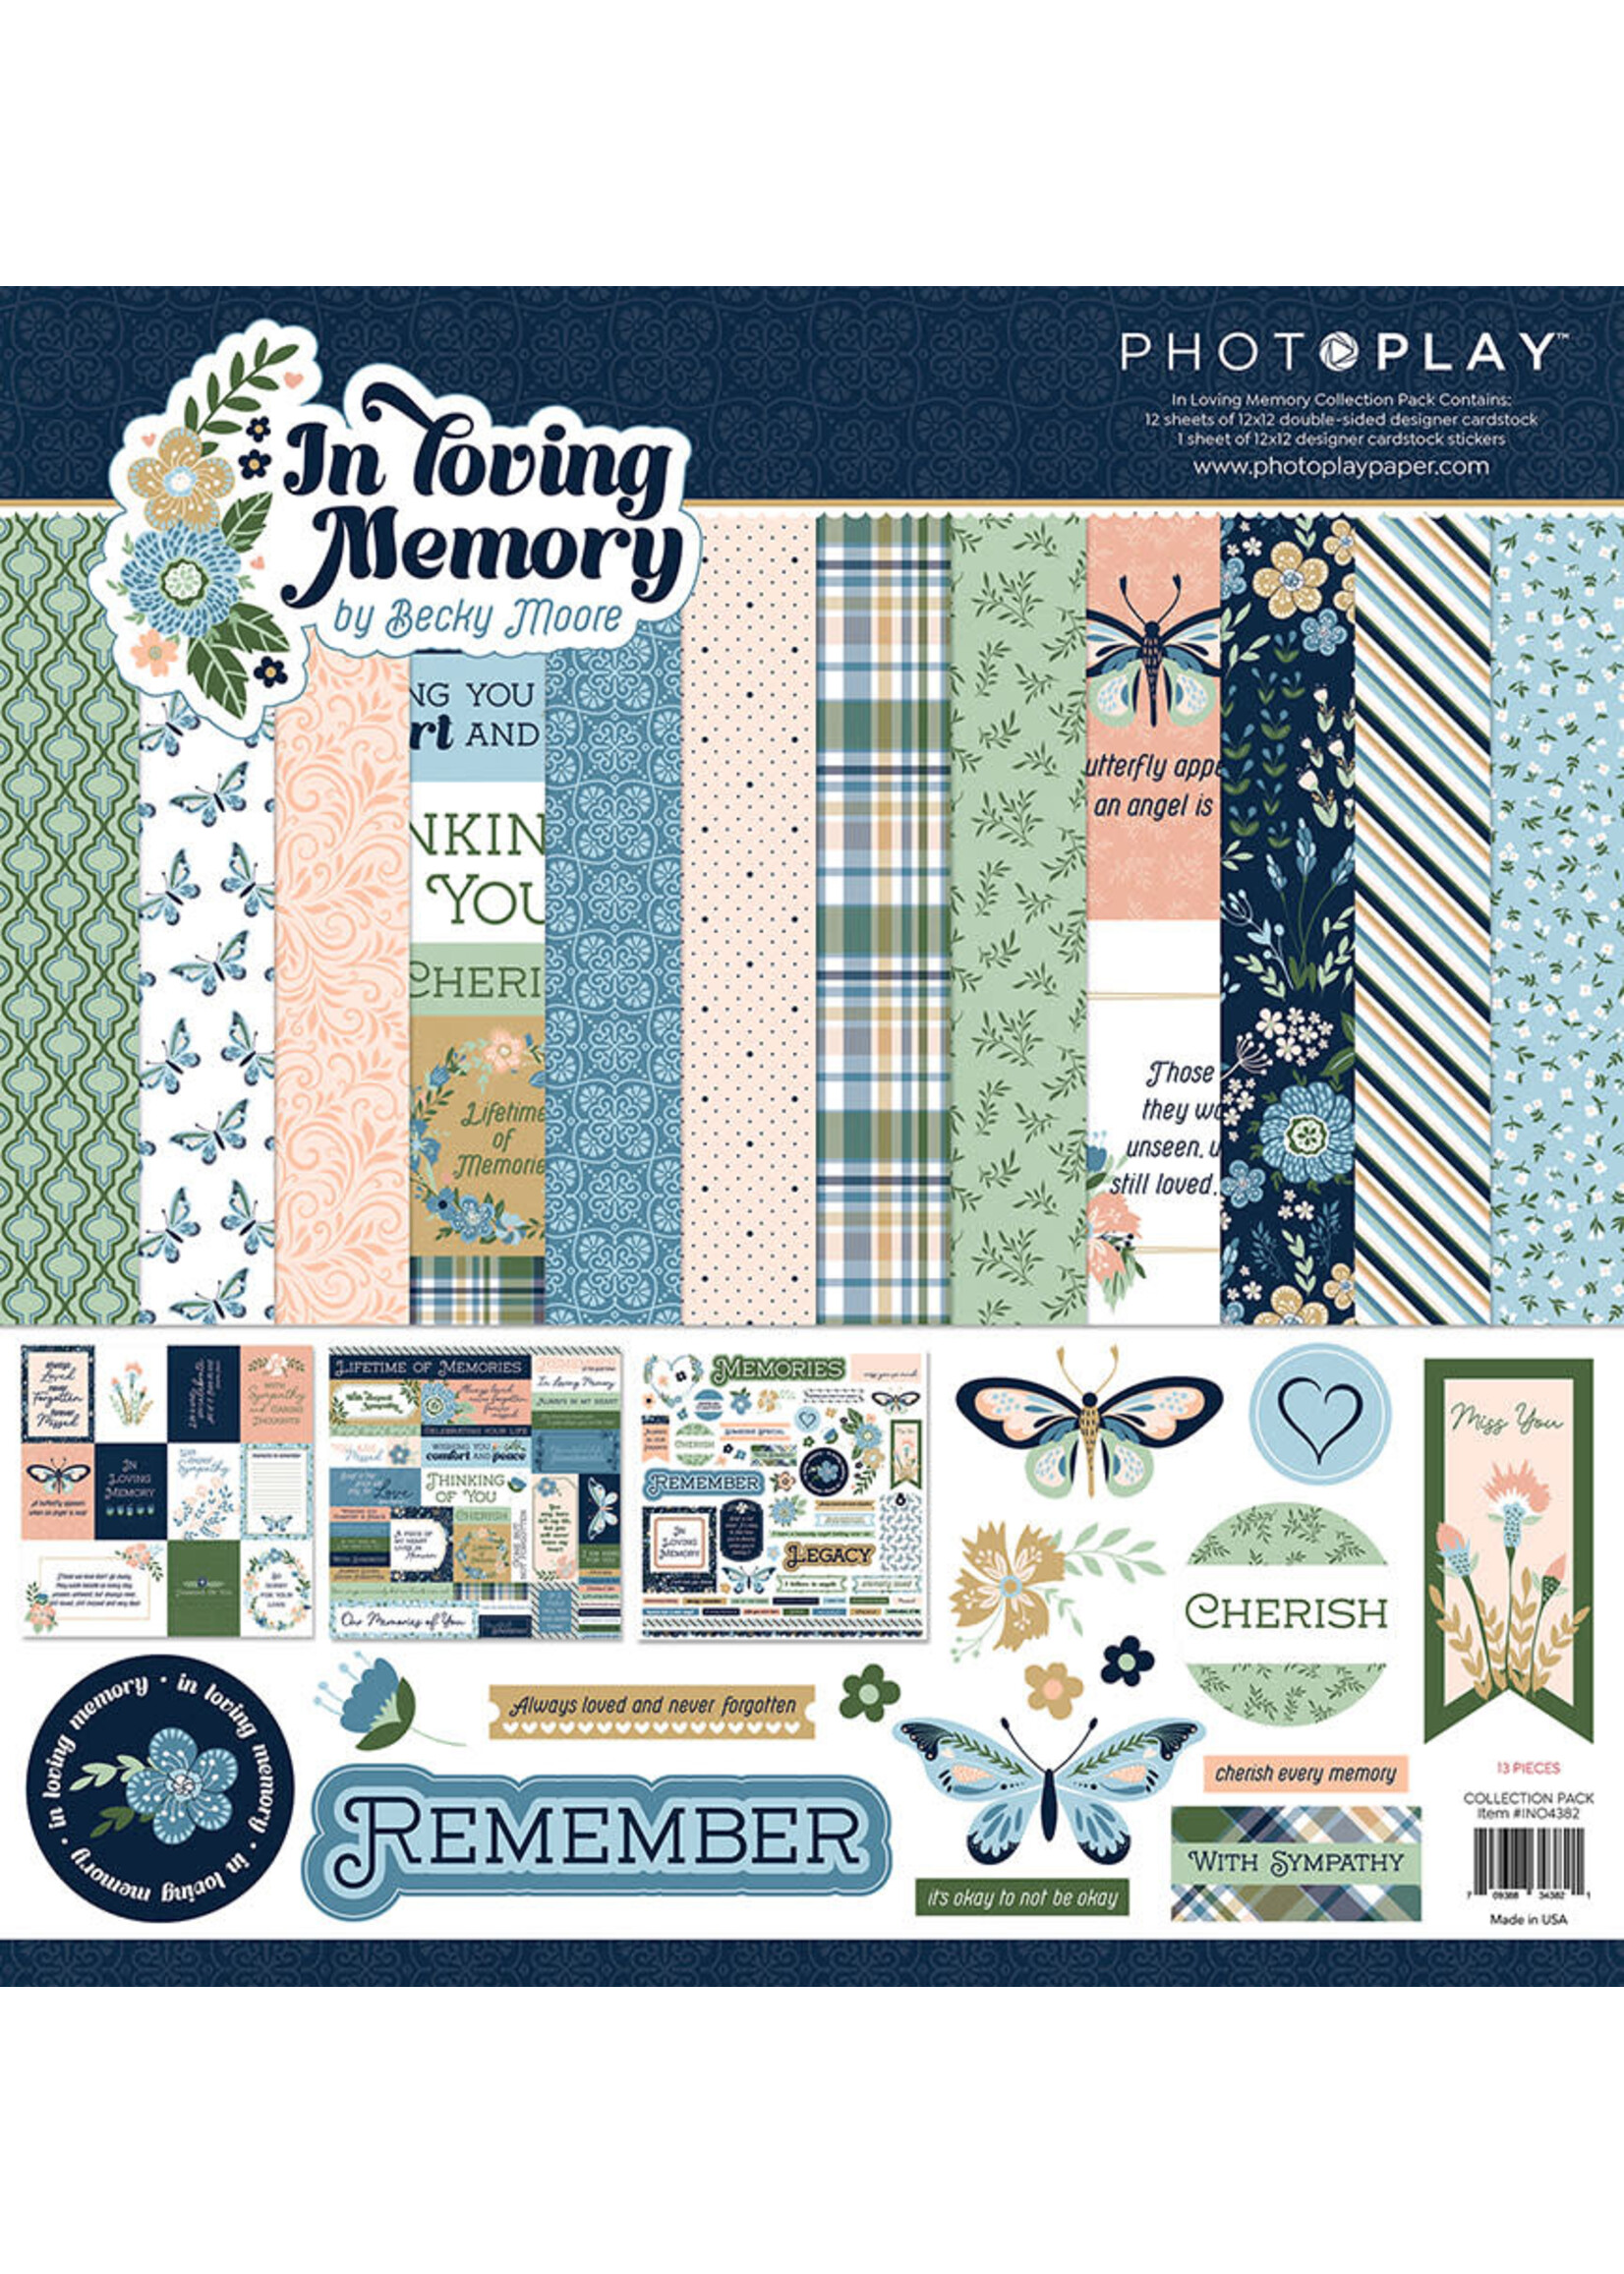 Photoplay In Loving Memory: Collection Pack